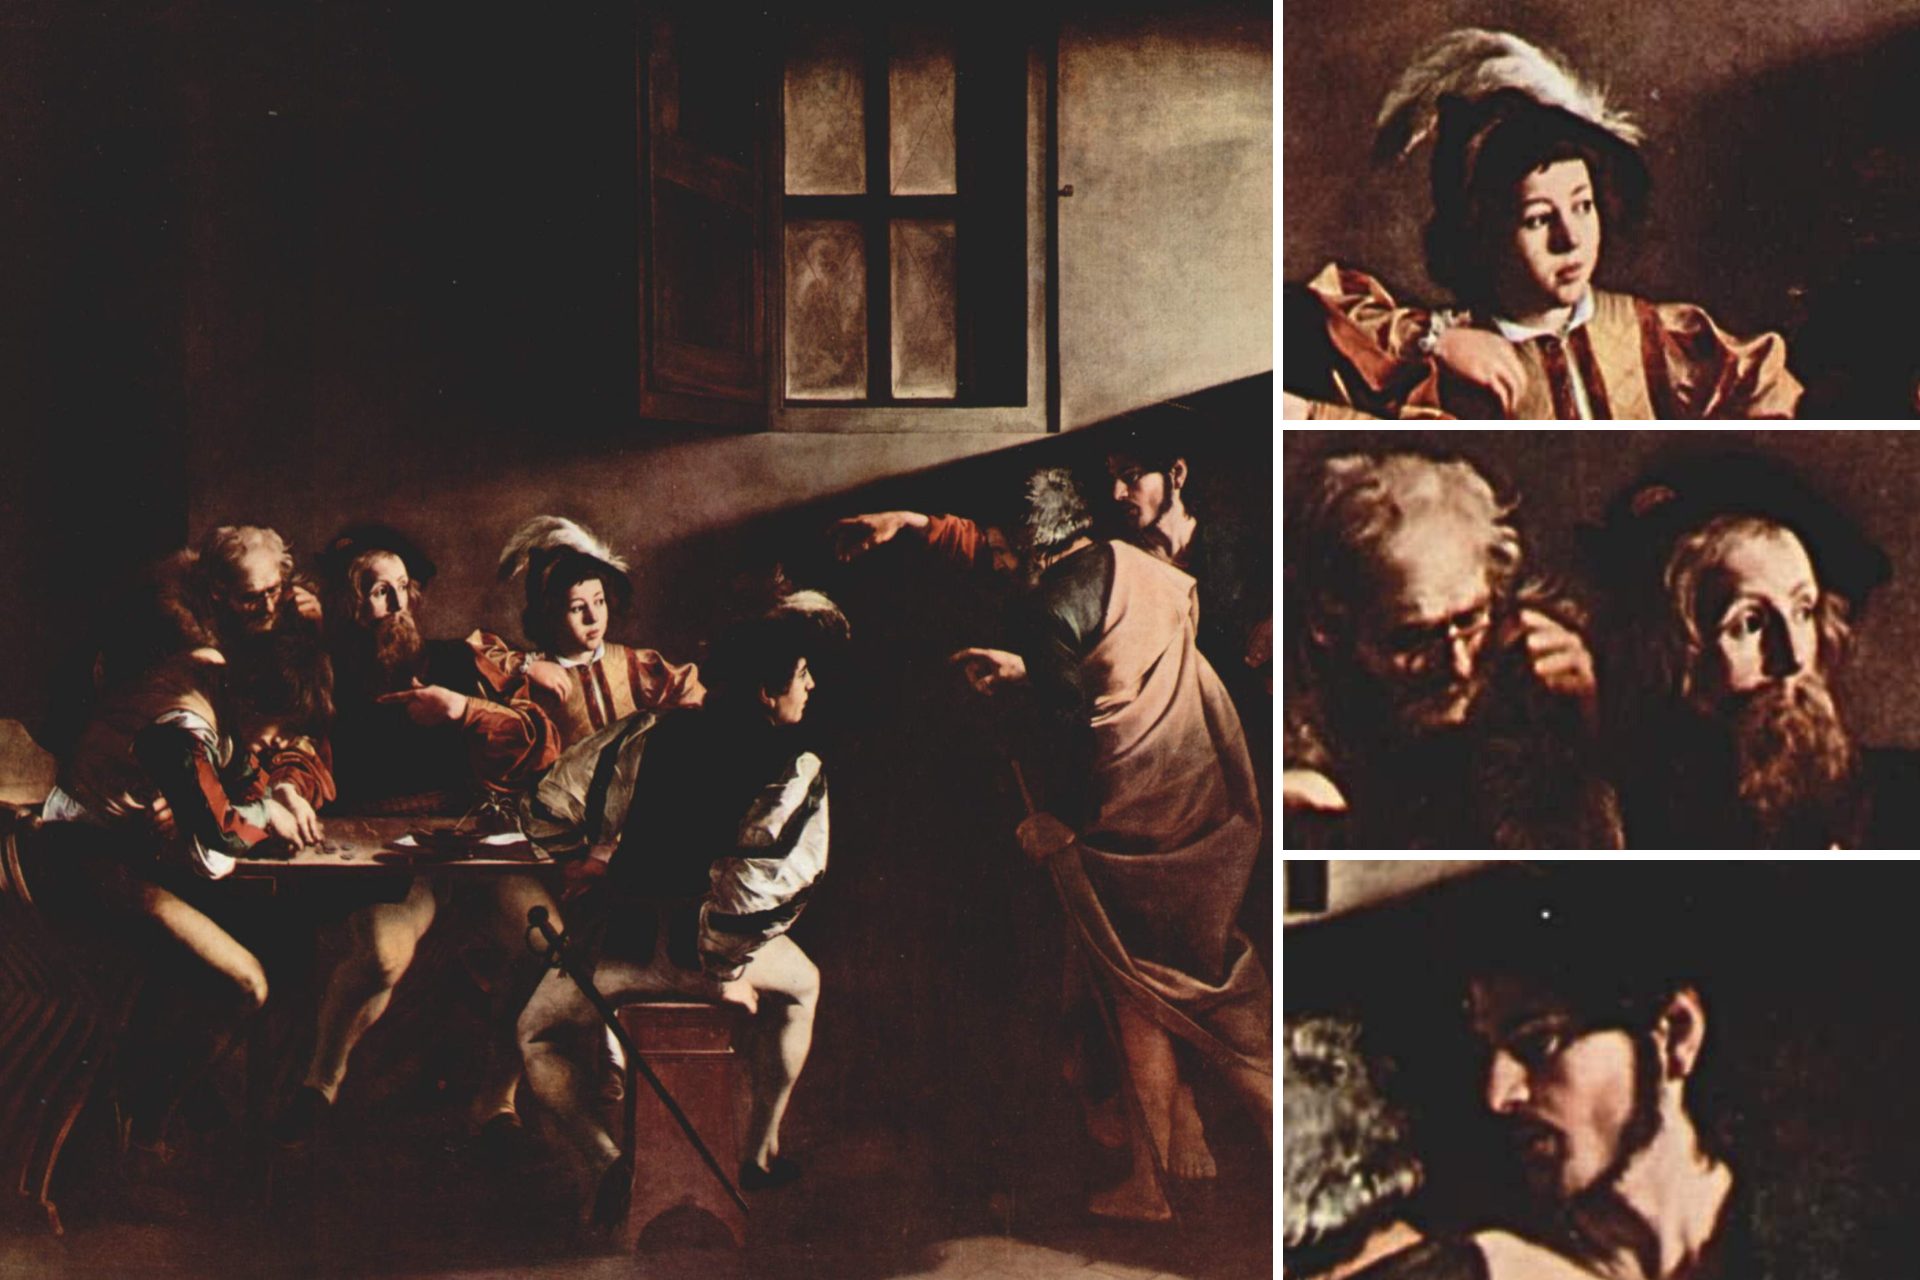 In the painting by Caravaggio, Matthew the tax collector is seated at a table, accompanied by four other men. Jesus Christ and Saint Peter make their entrance into the room, with Jesus gesturing towards Matthew. A beam of light shines upon the faces of those at the table, whose gazes are directed at Jesus Christ.